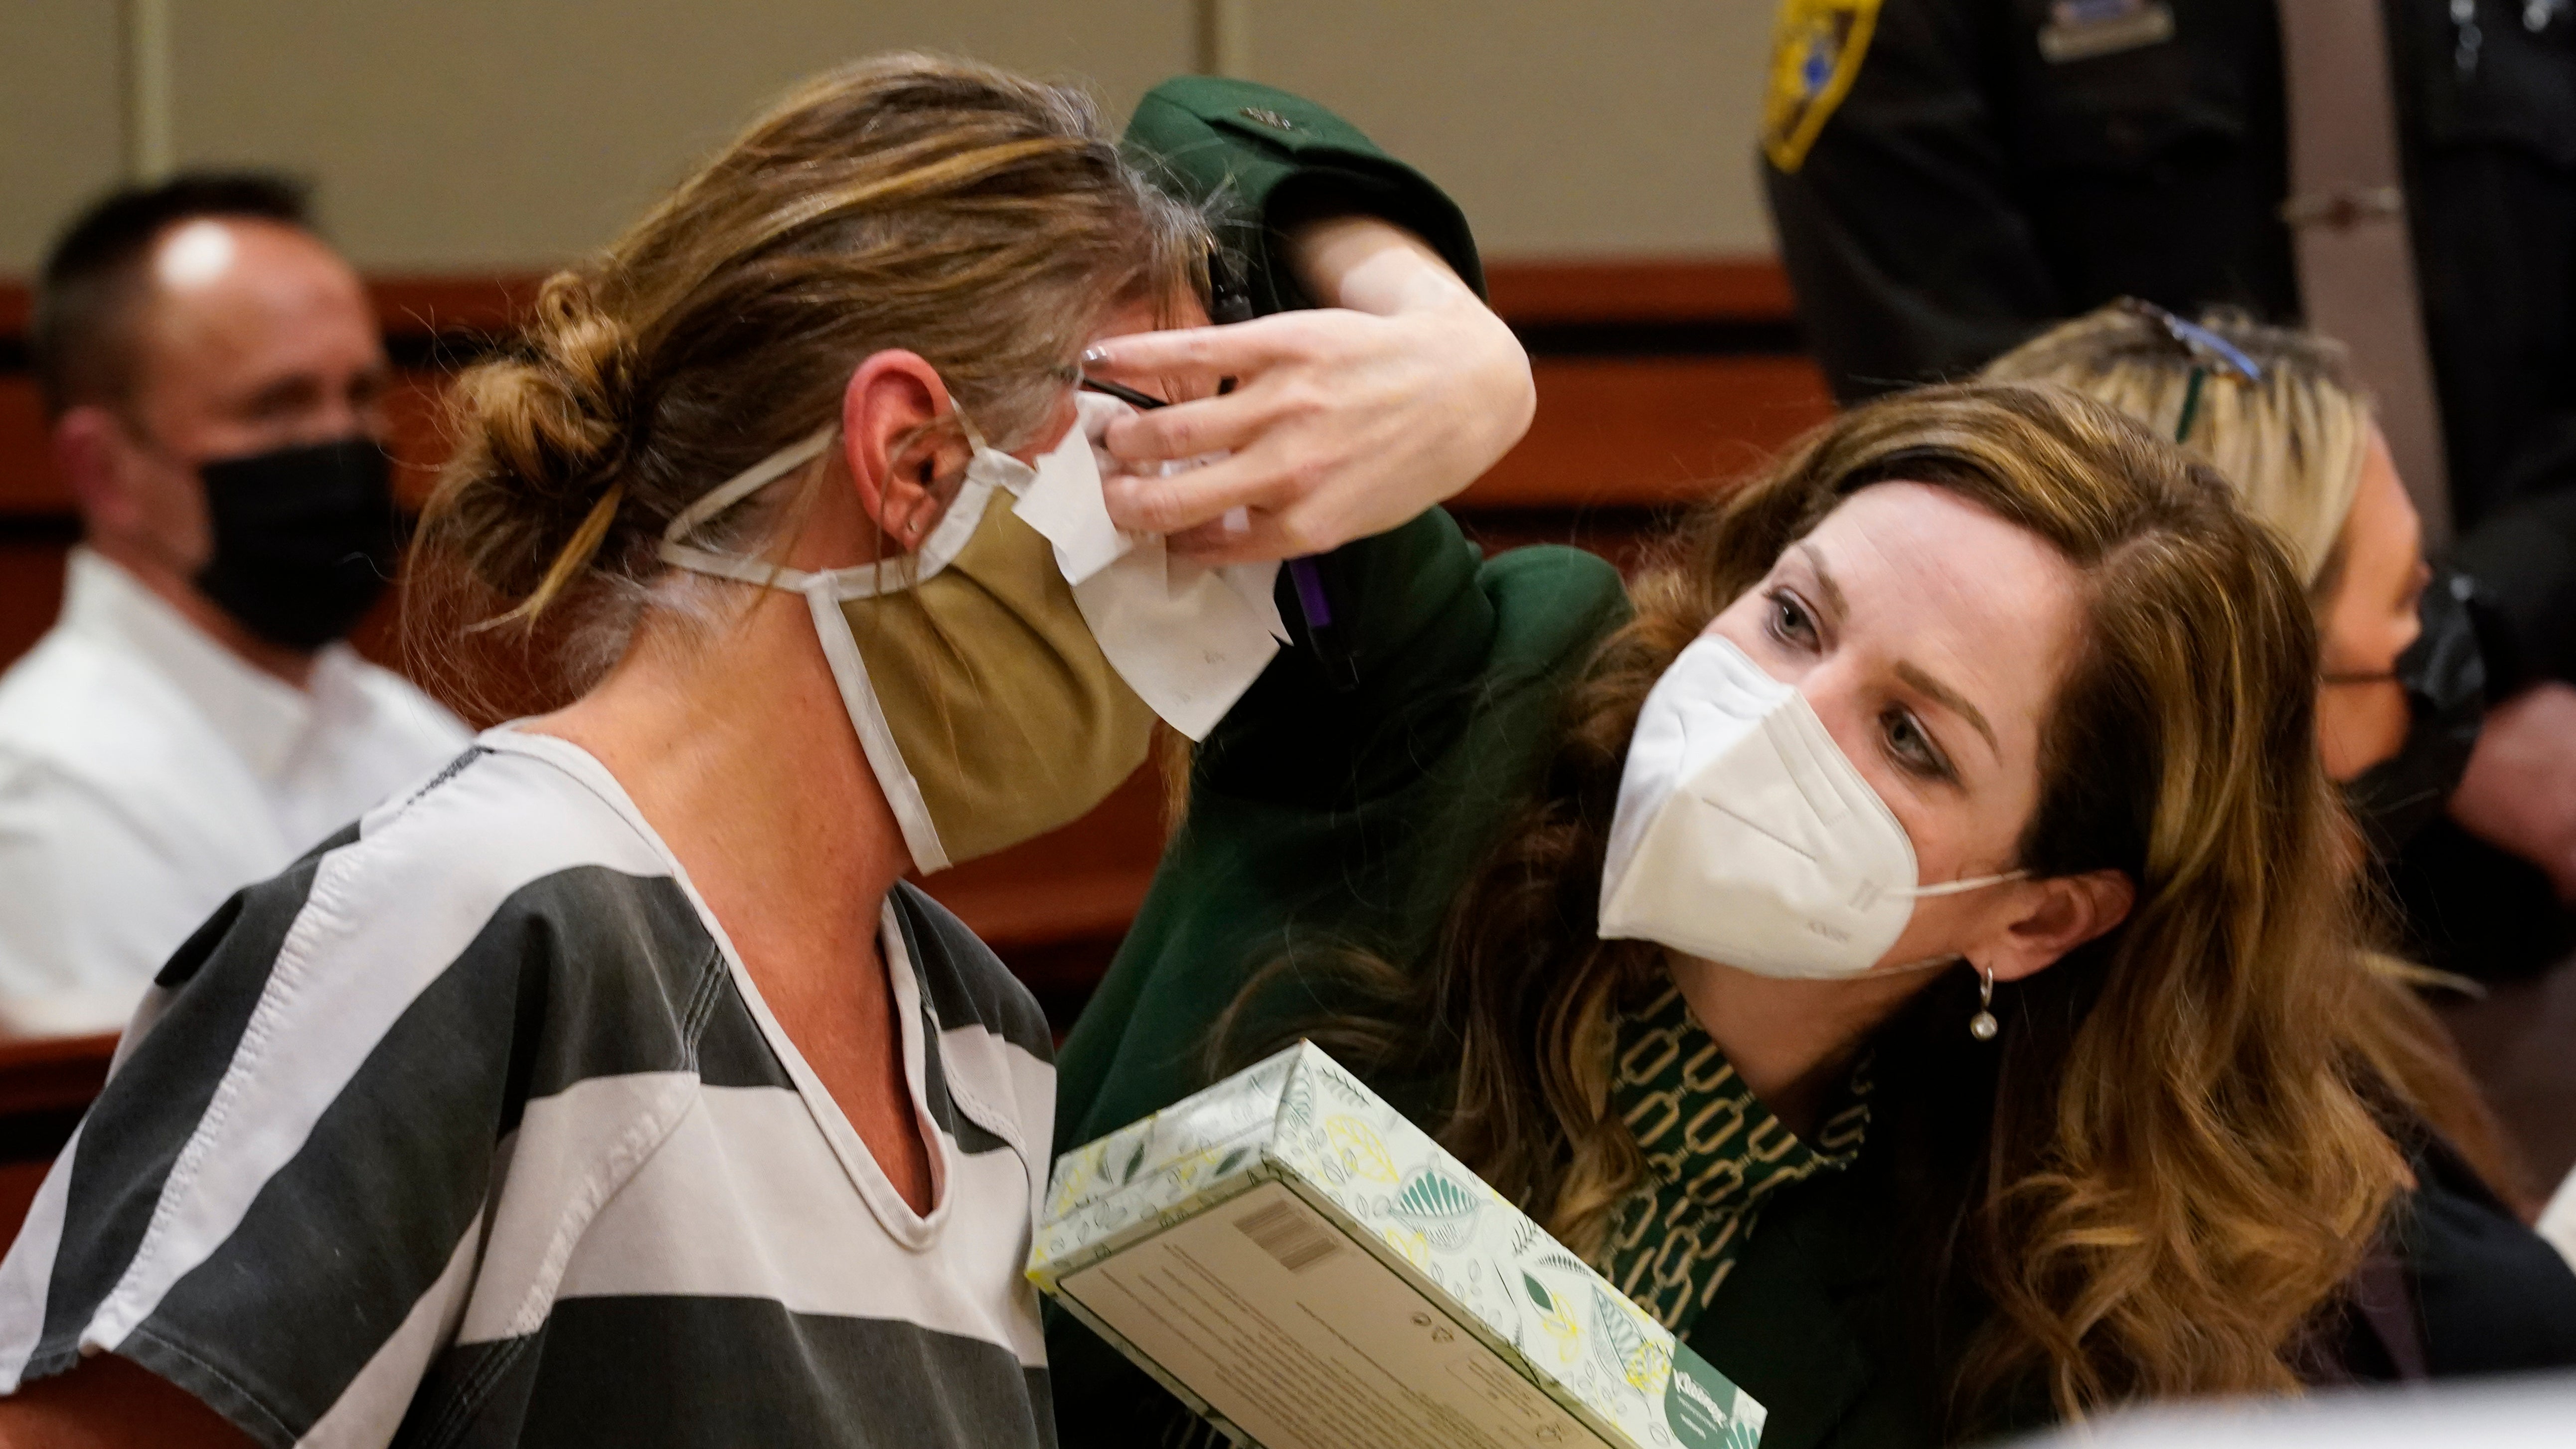 Jennifer Crumbley’s attorney wipes tears from her eyes as she breaks down listening to the 911 call